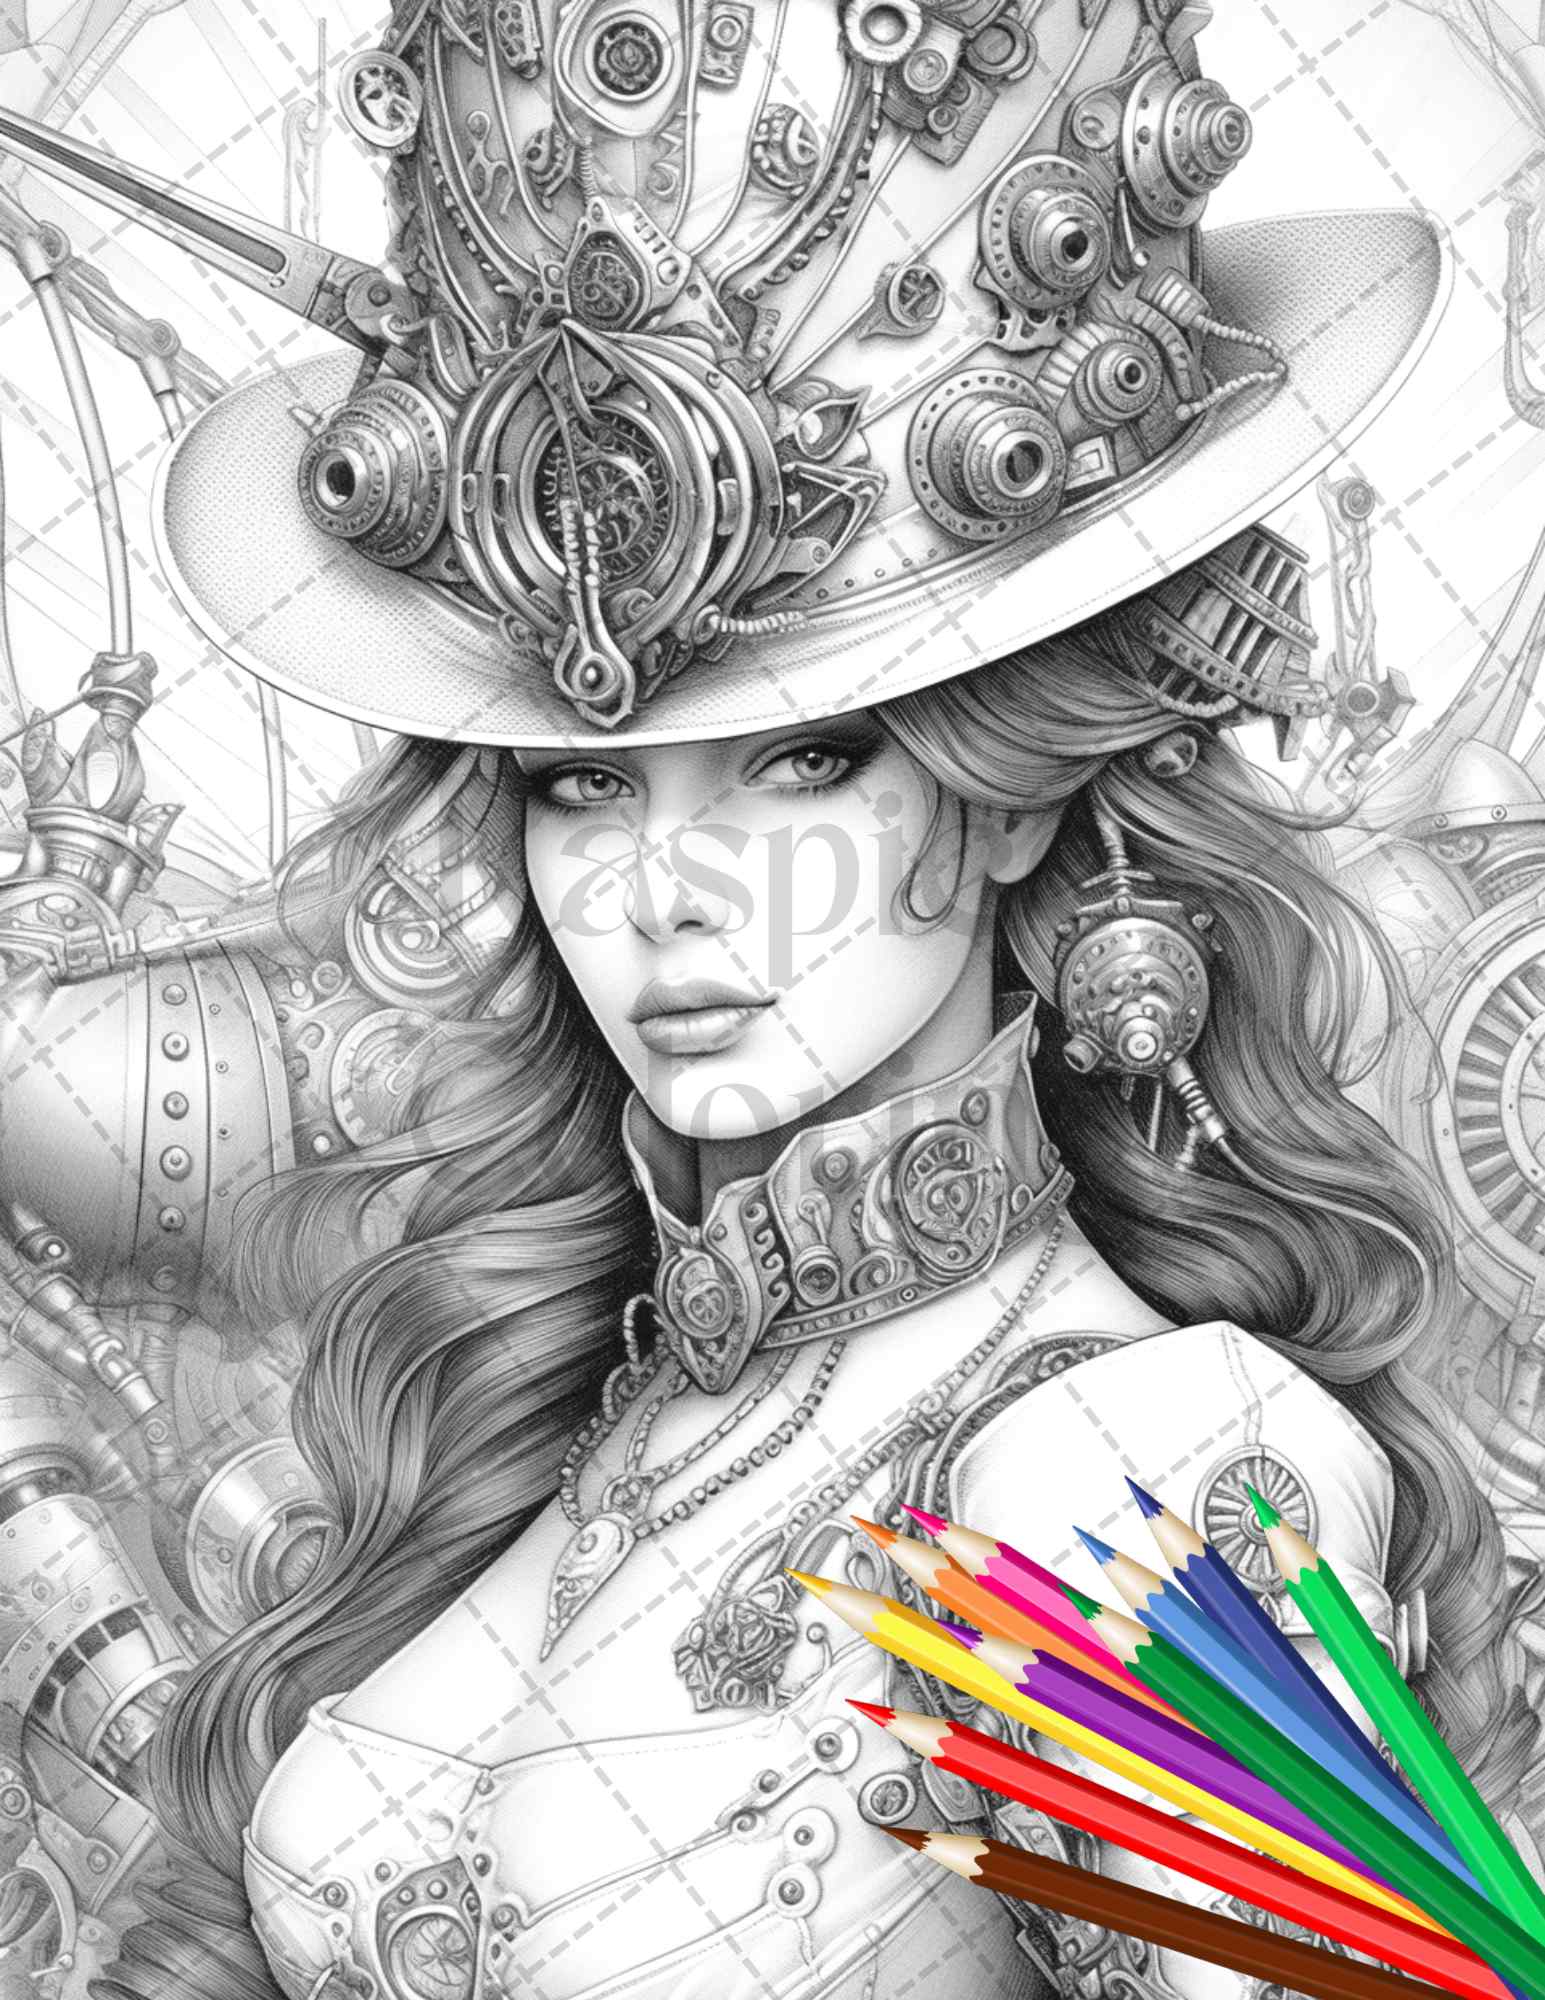 steampunk ladies grayscale coloring pages, printable coloring for adults, black and white coloring sheets, Victorian-style grayscale illustrations, intricate designs for coloring, portrait coloring pages